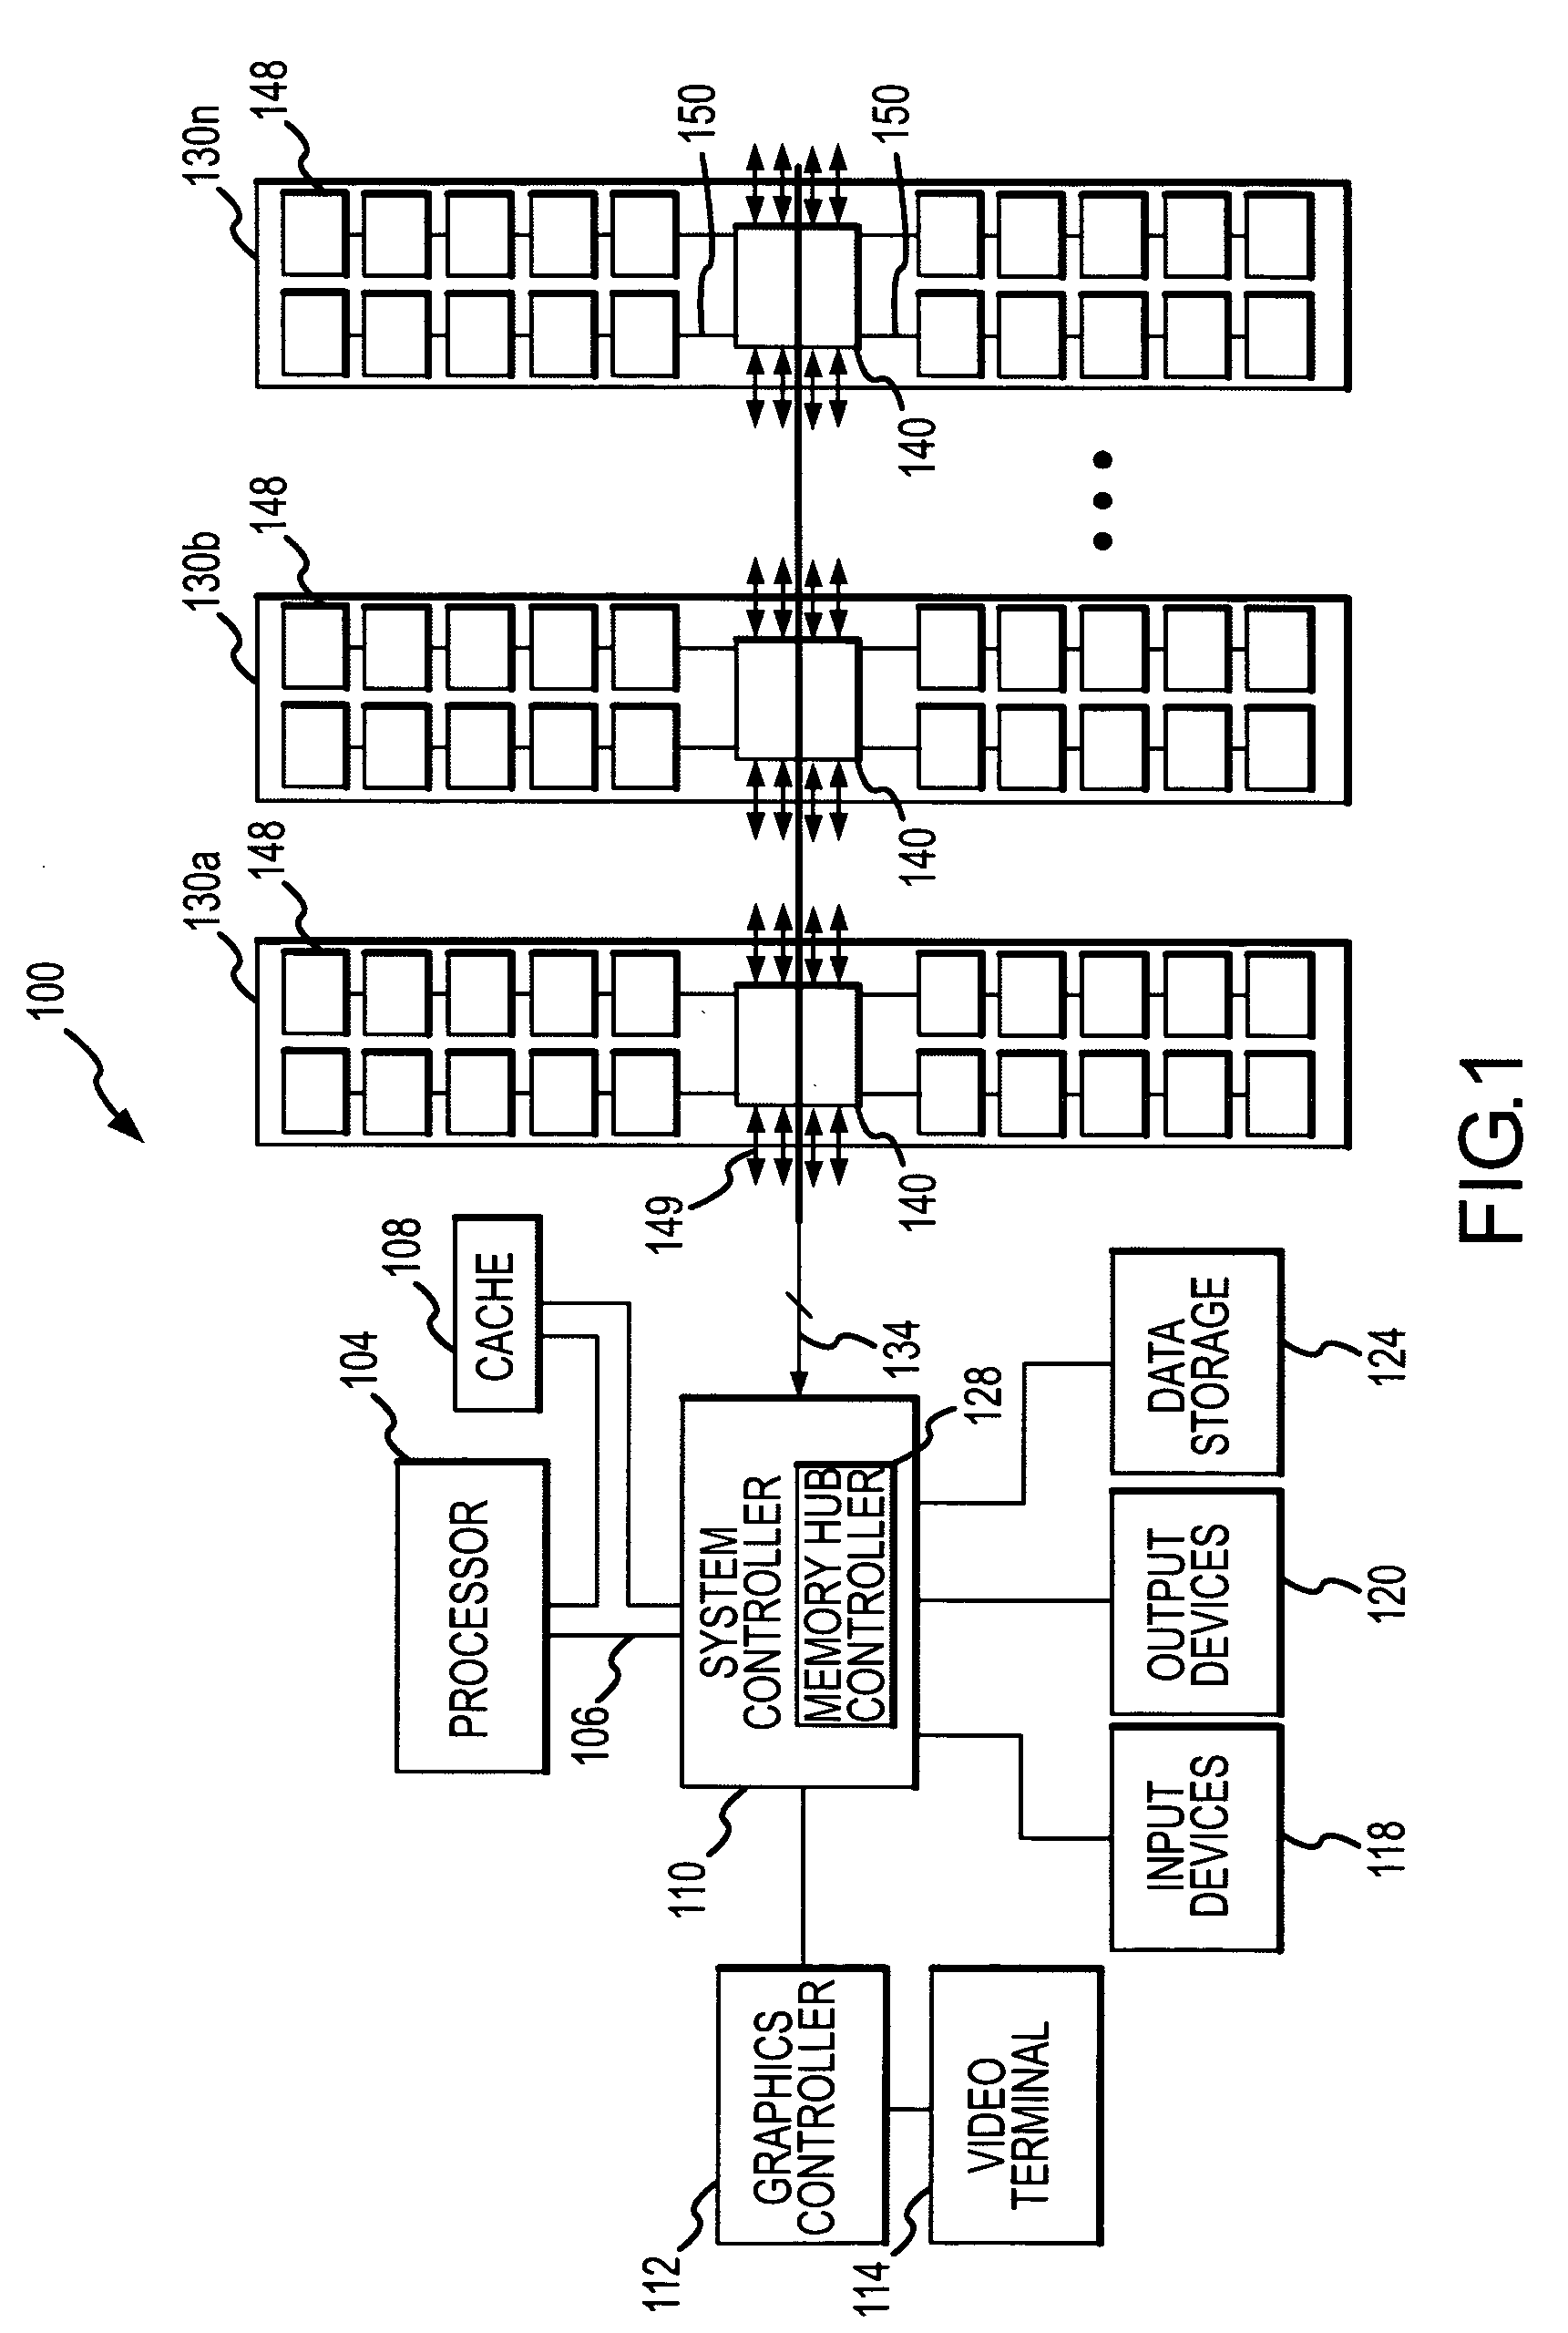 Memory hub and method for memory sequencing